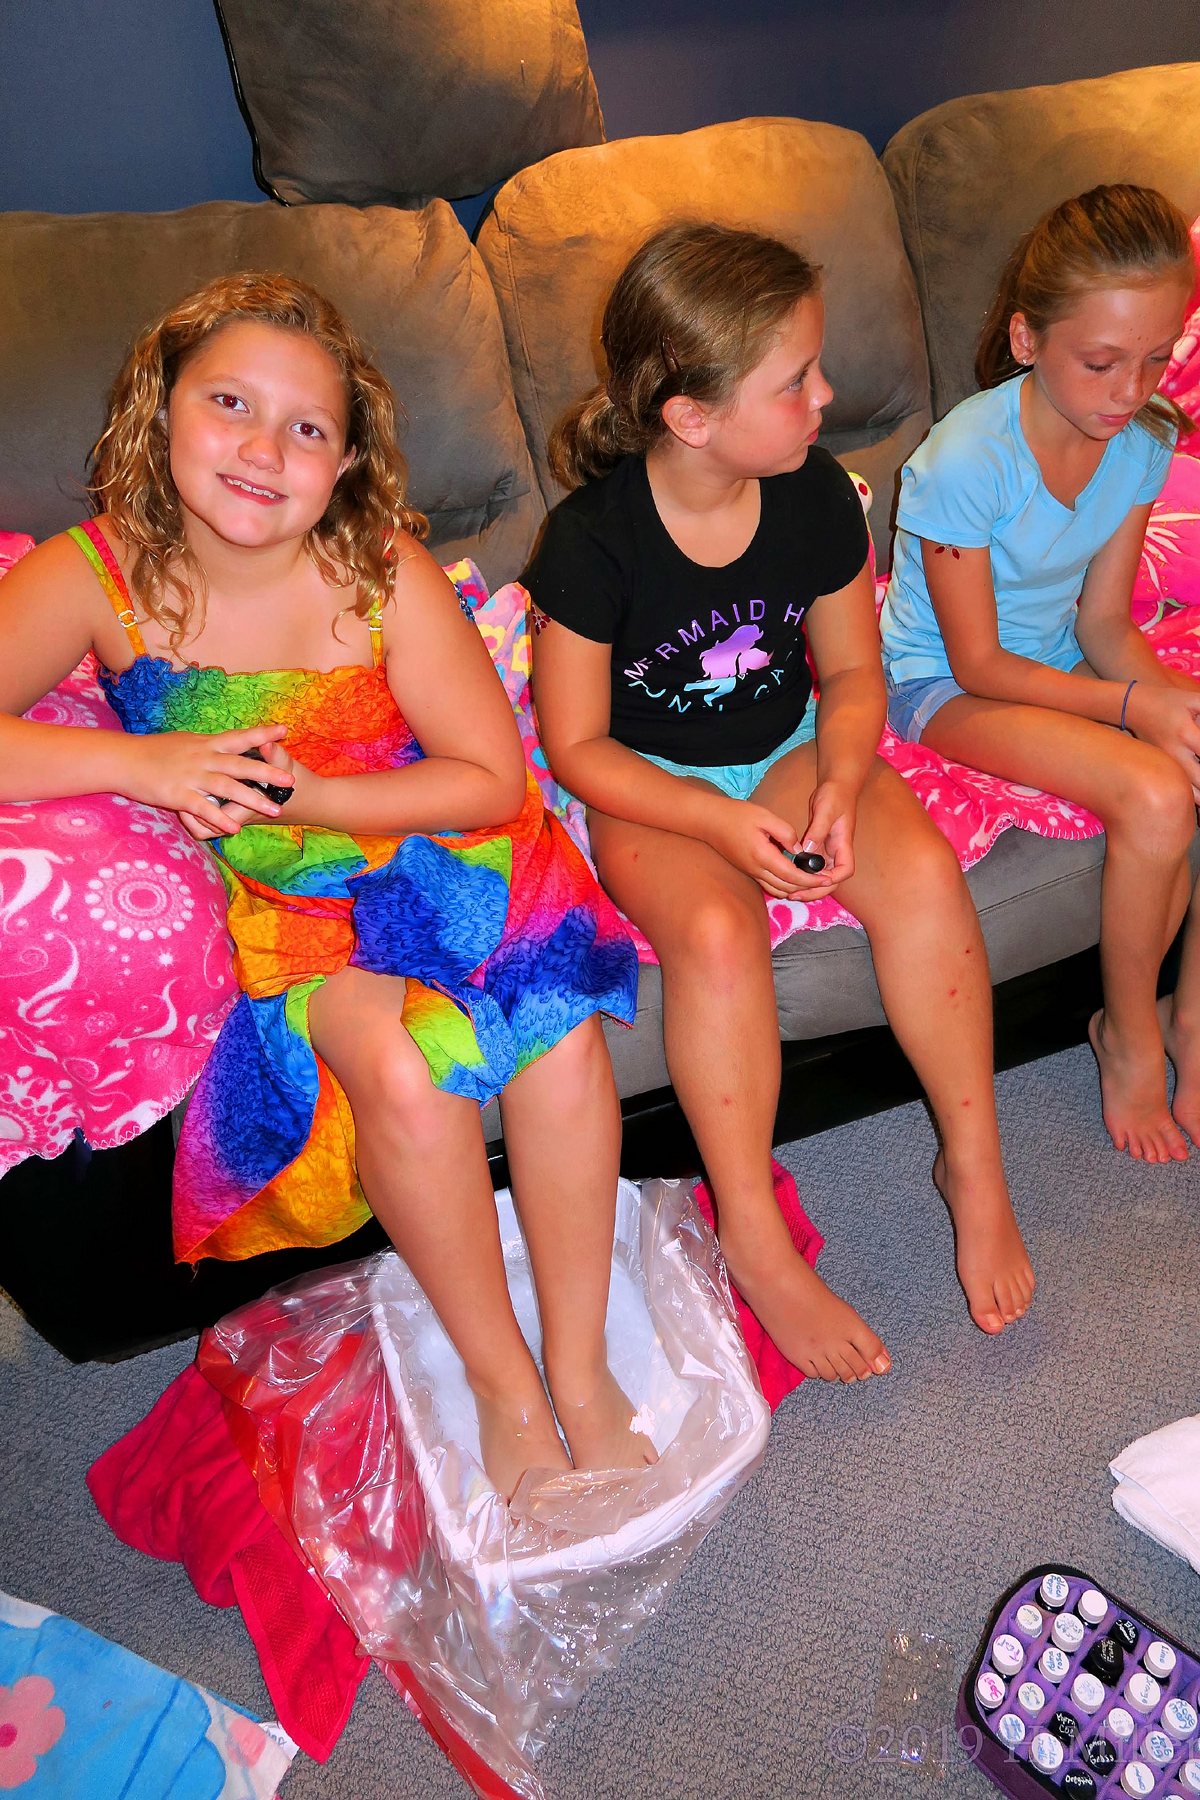 Pedicures With Friends At The Spa For Girls. 